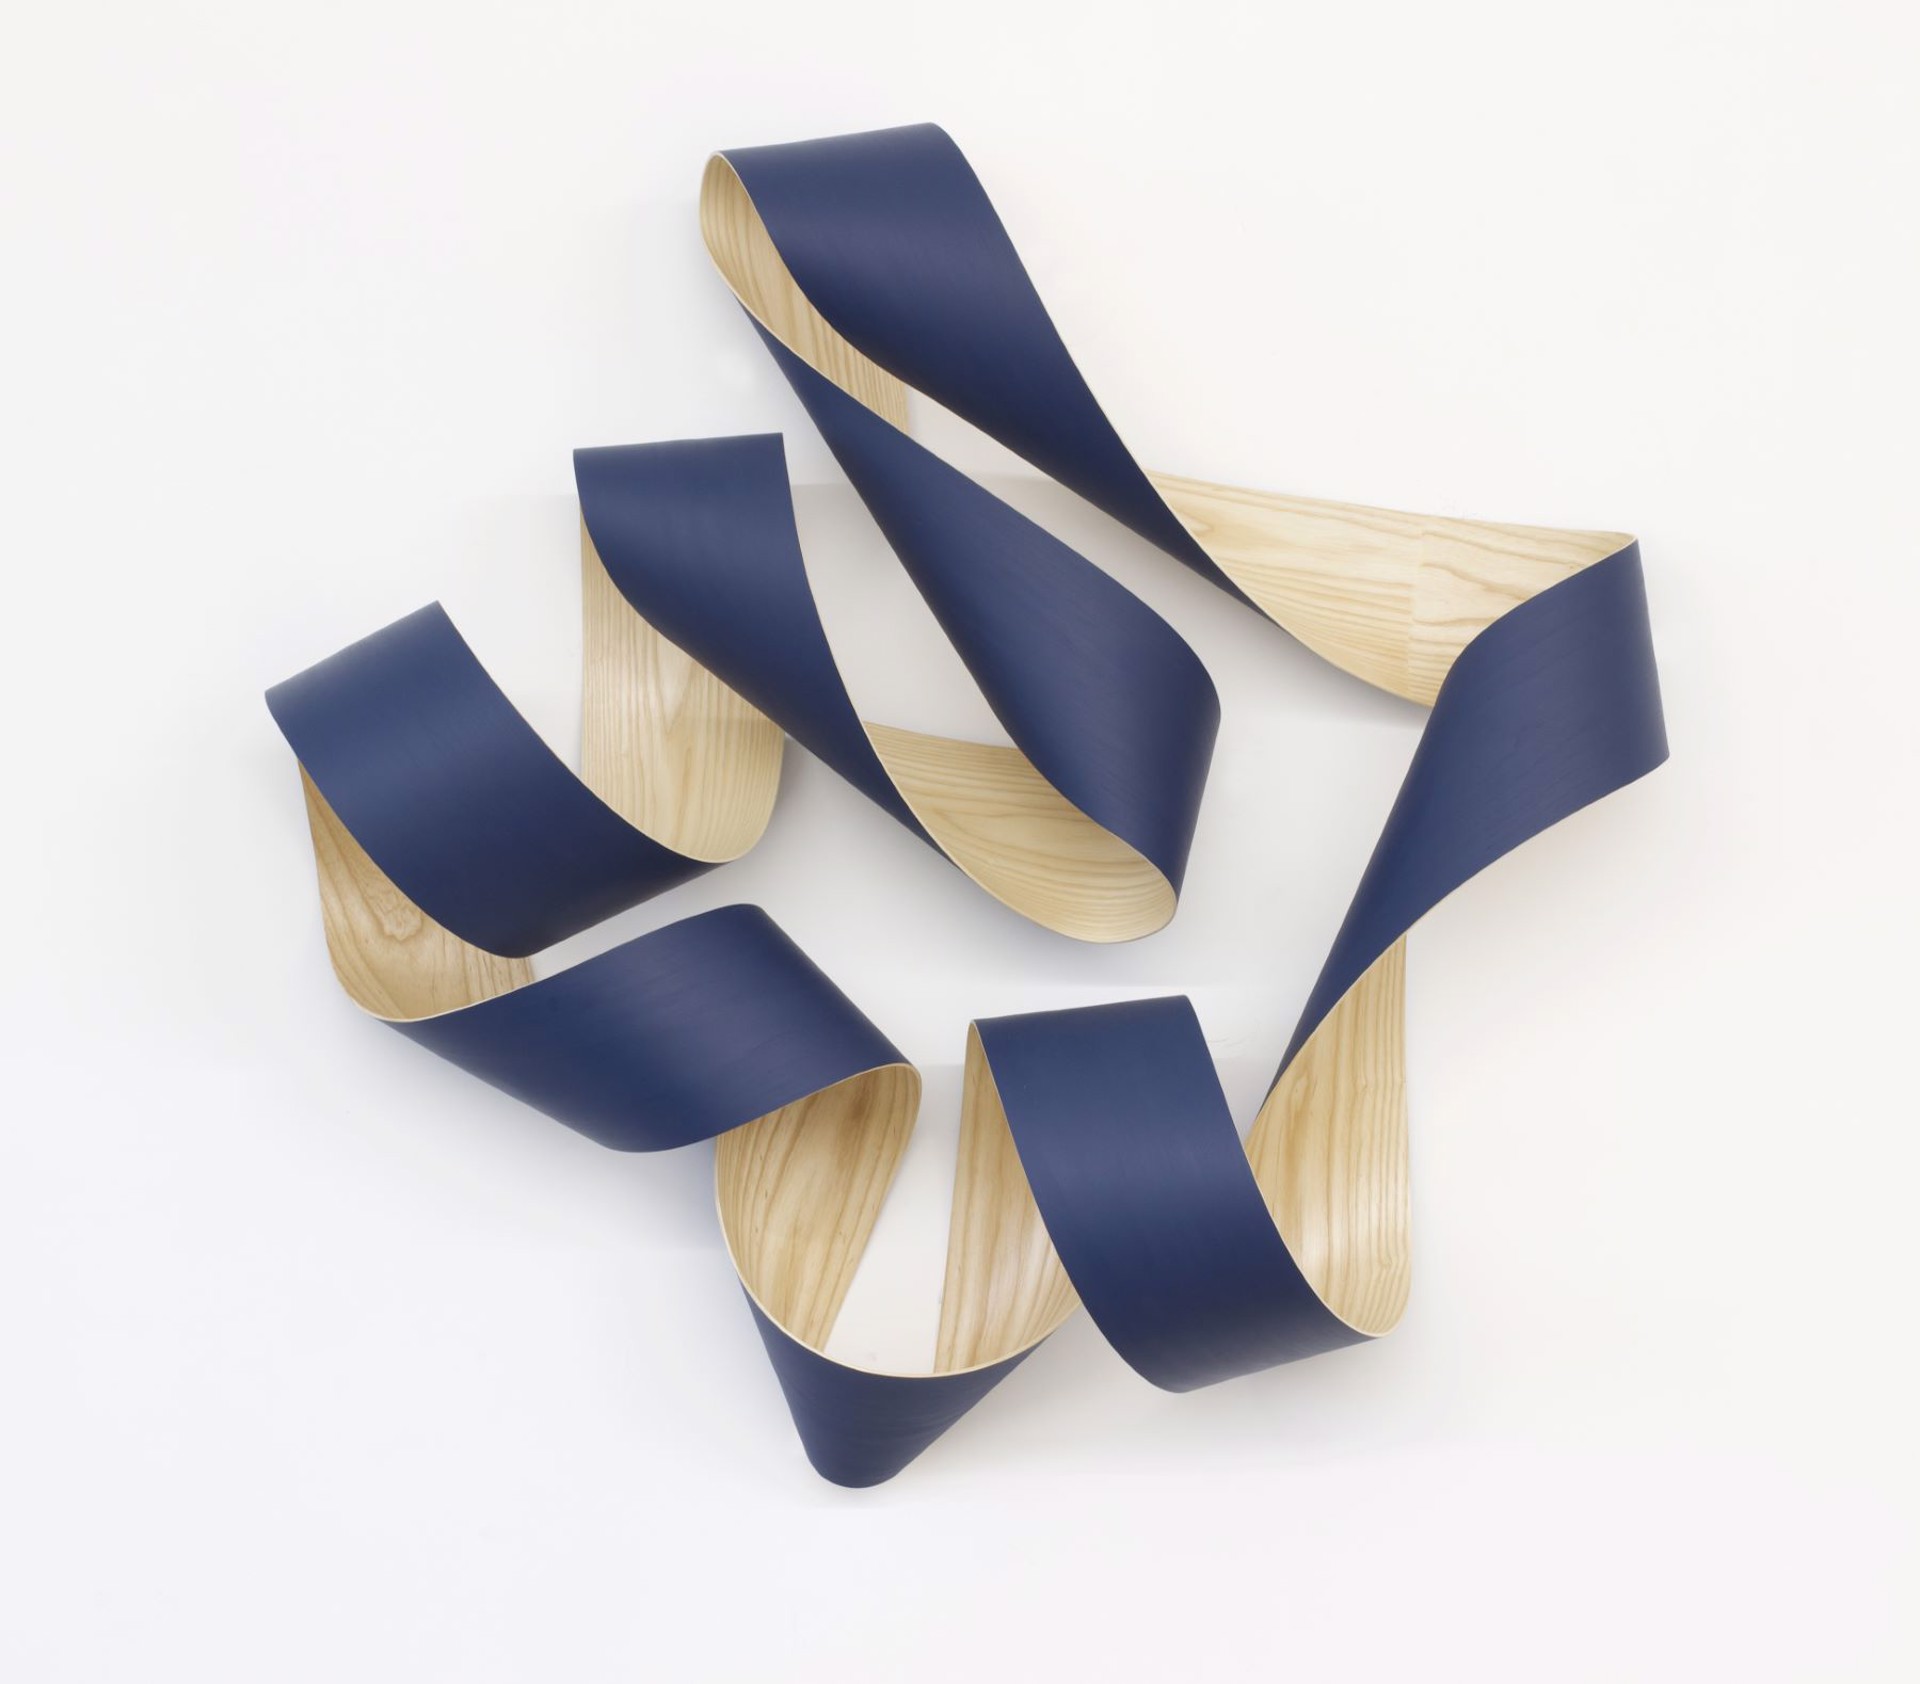 Untitled (Blue with natural wood) by Jeremy Holmes